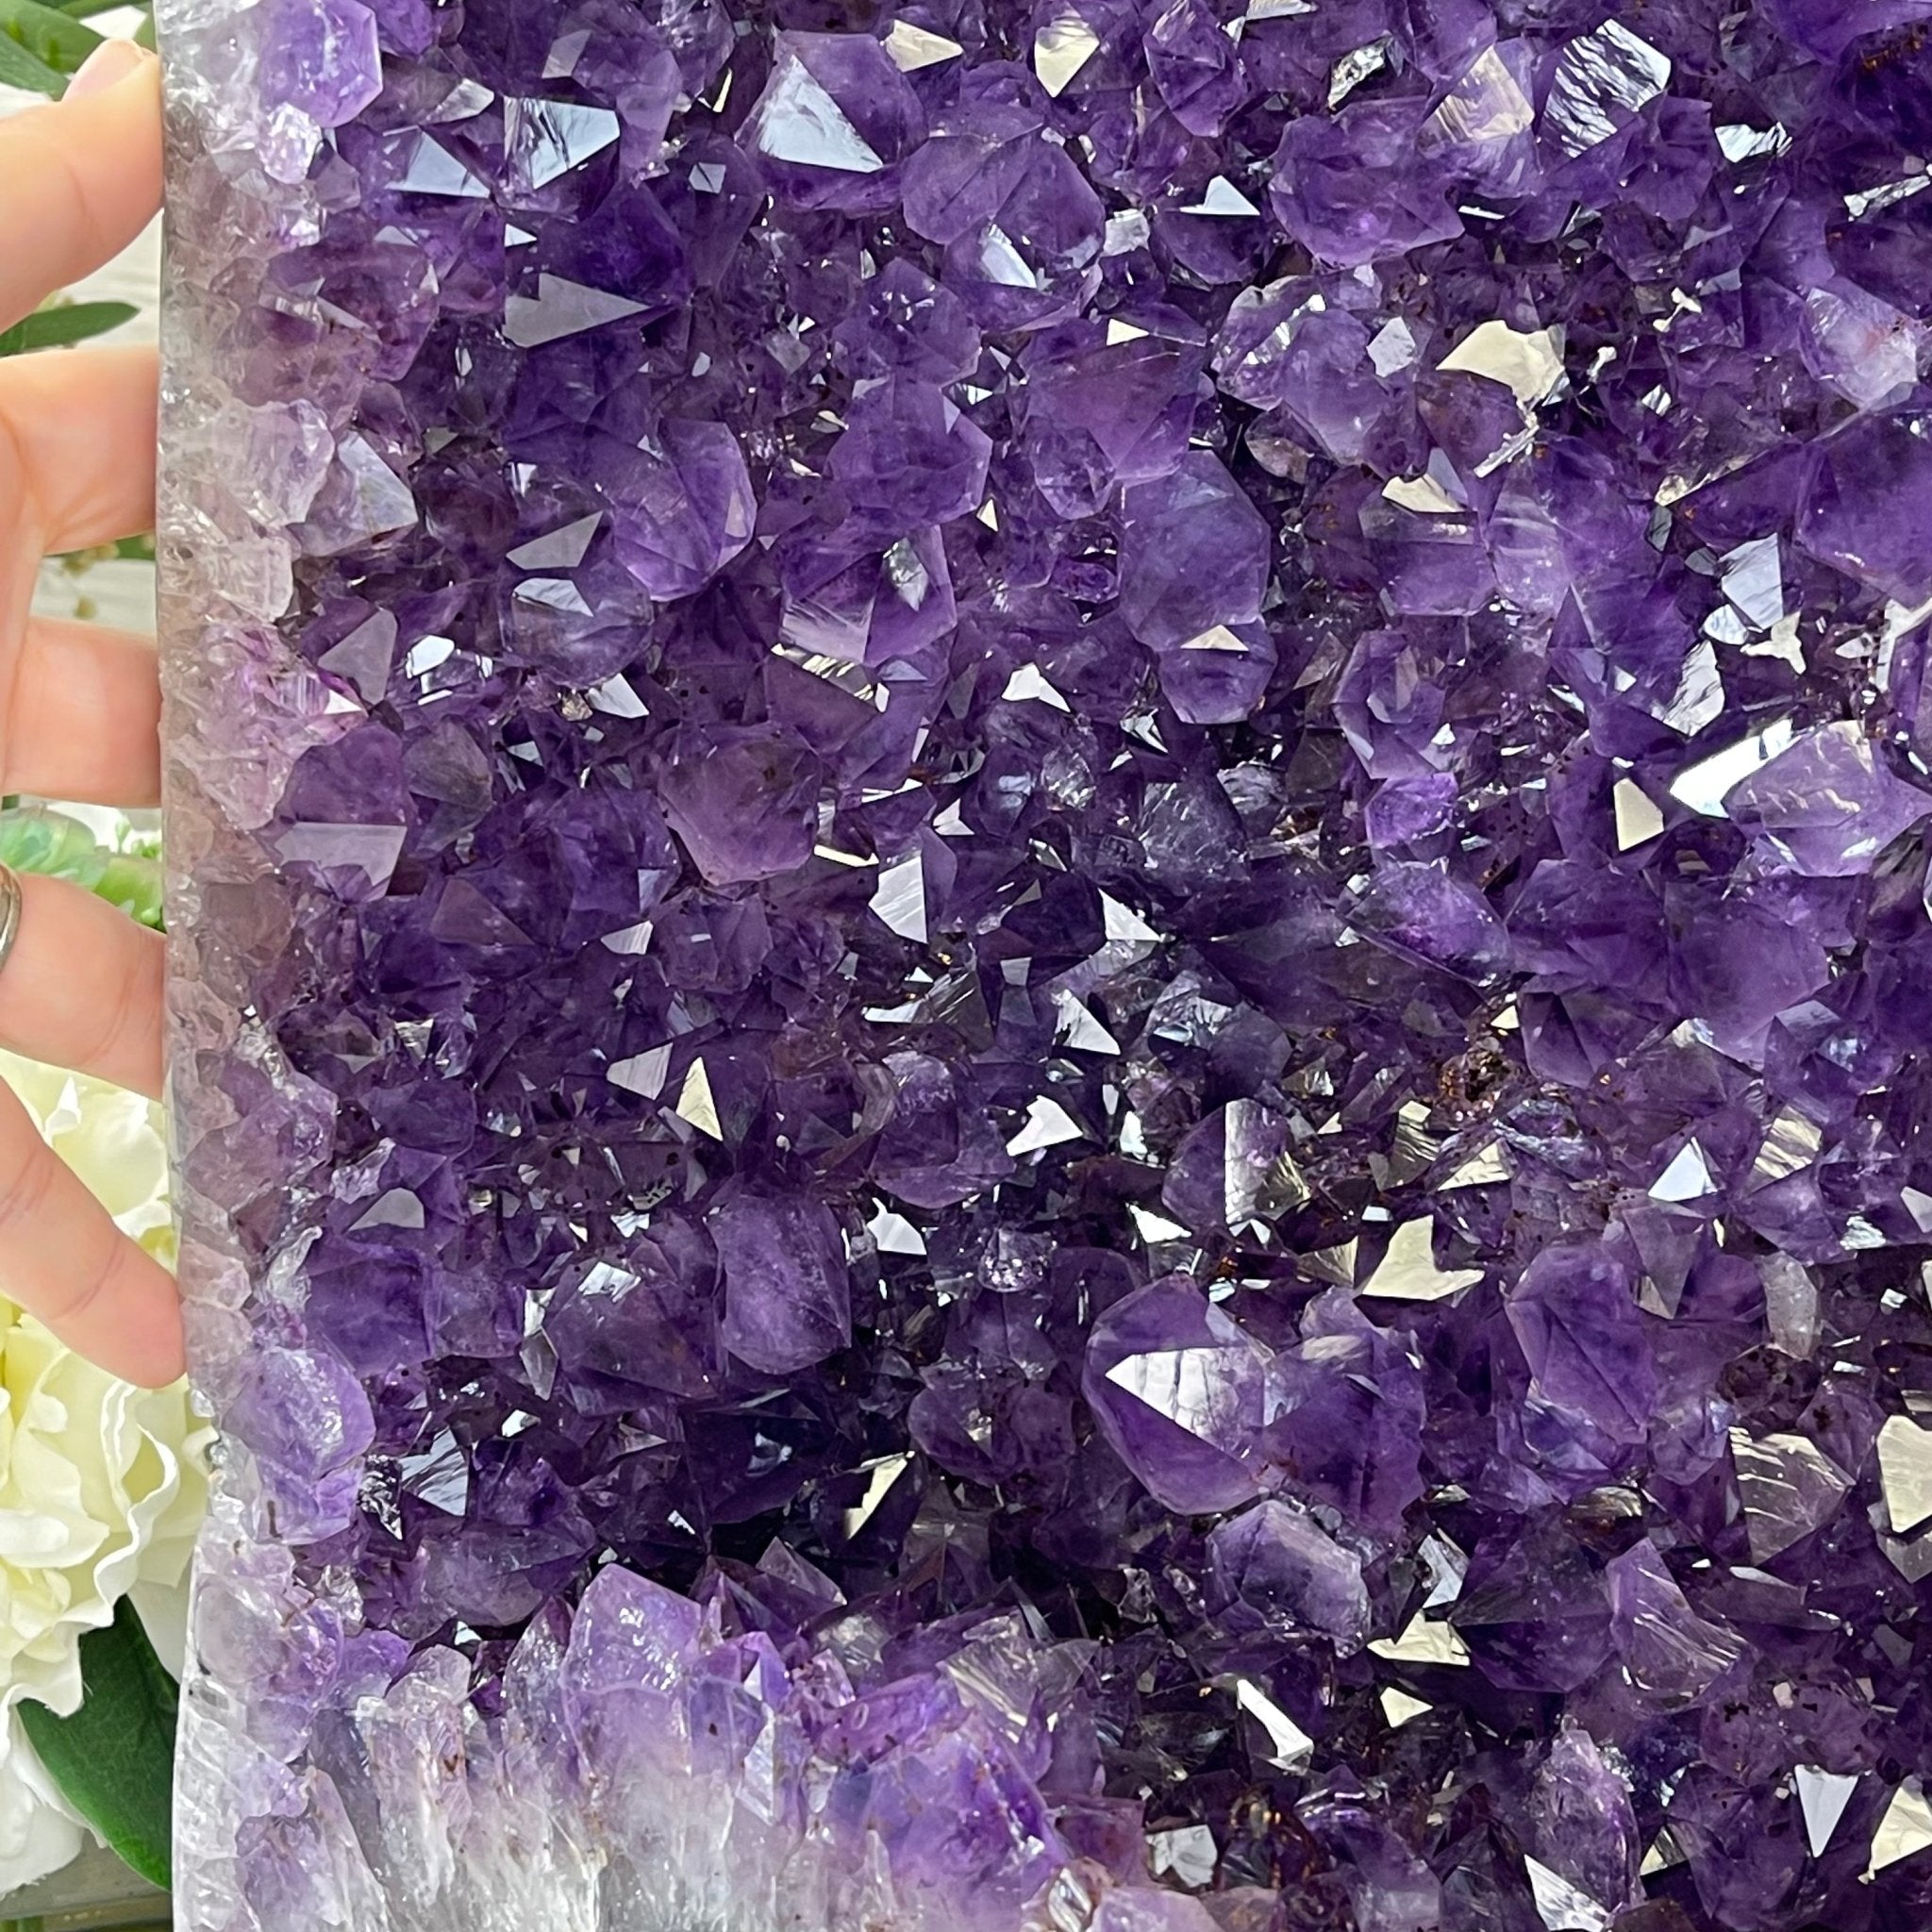 Super Quality Brazilian Amethyst Cathedral, 89.8 lbs & 27.2" Tall #5601-1170 by Brazil Gems - Brazil GemsBrazil GemsSuper Quality Brazilian Amethyst Cathedral, 89.8 lbs & 27.2" Tall #5601-1170 by Brazil GemsCathedrals5601-1170